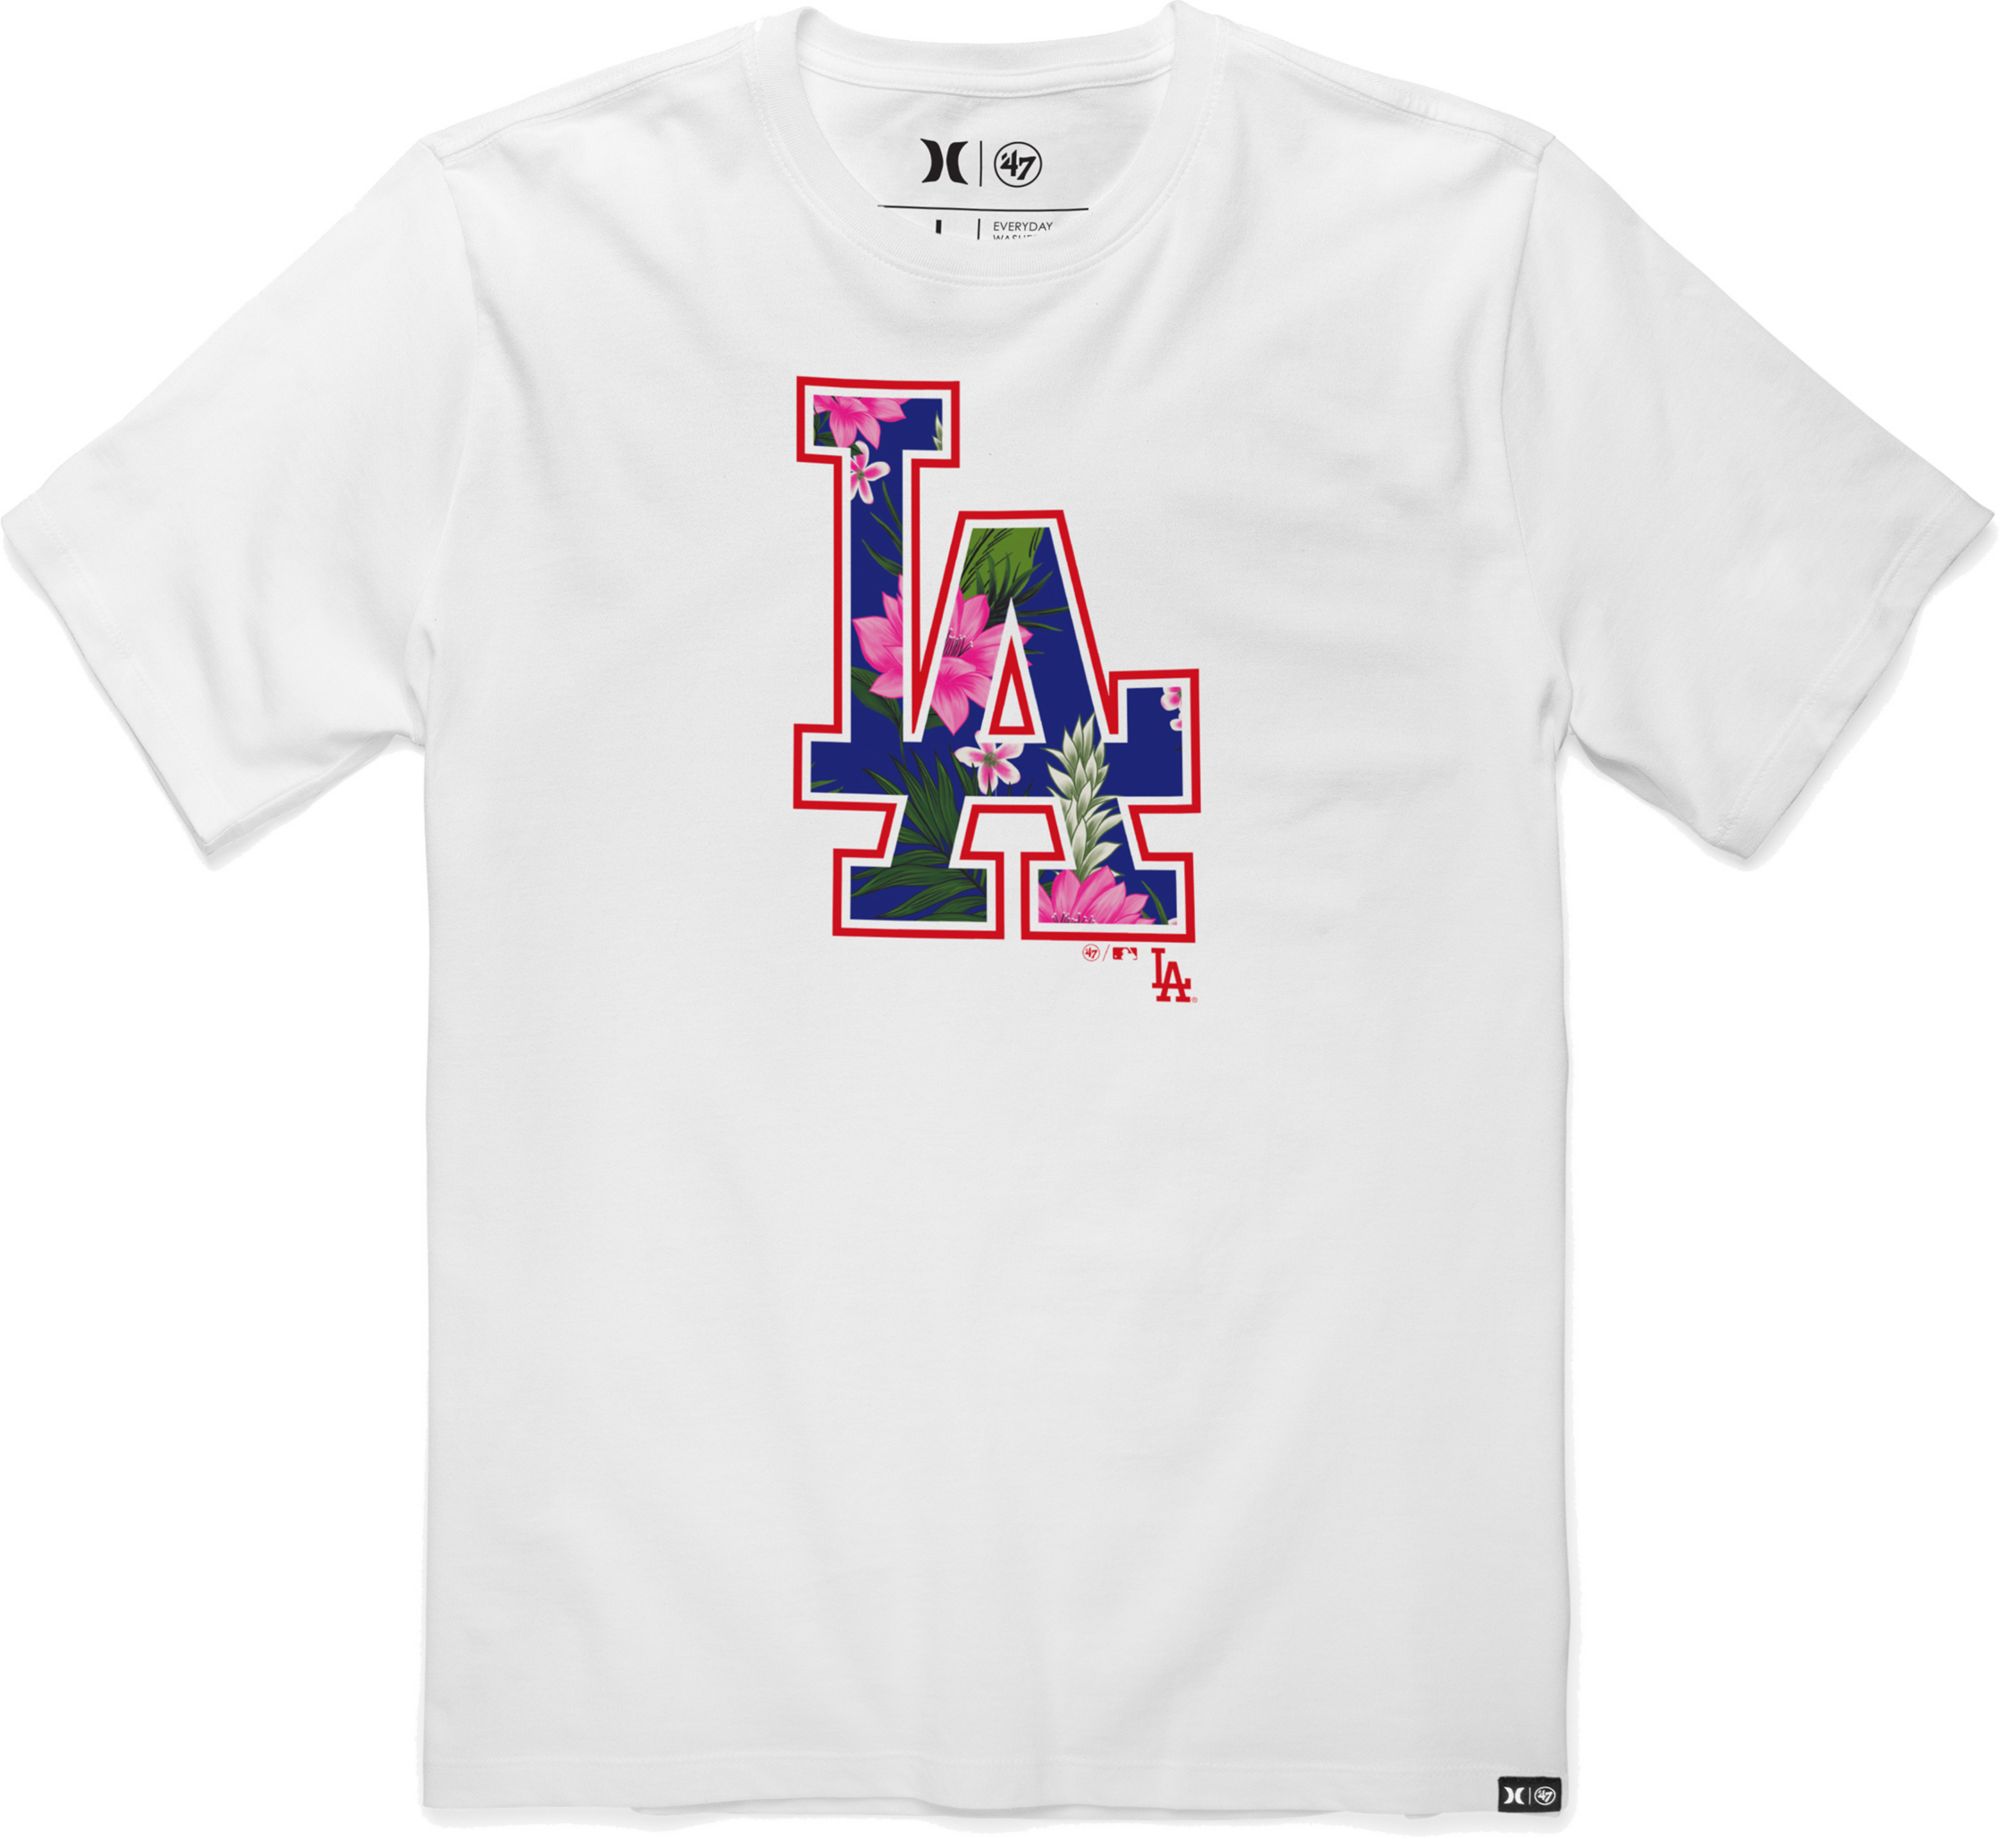 Men's Hurley x '47 White Chicago Cubs Everyday T-Shirt